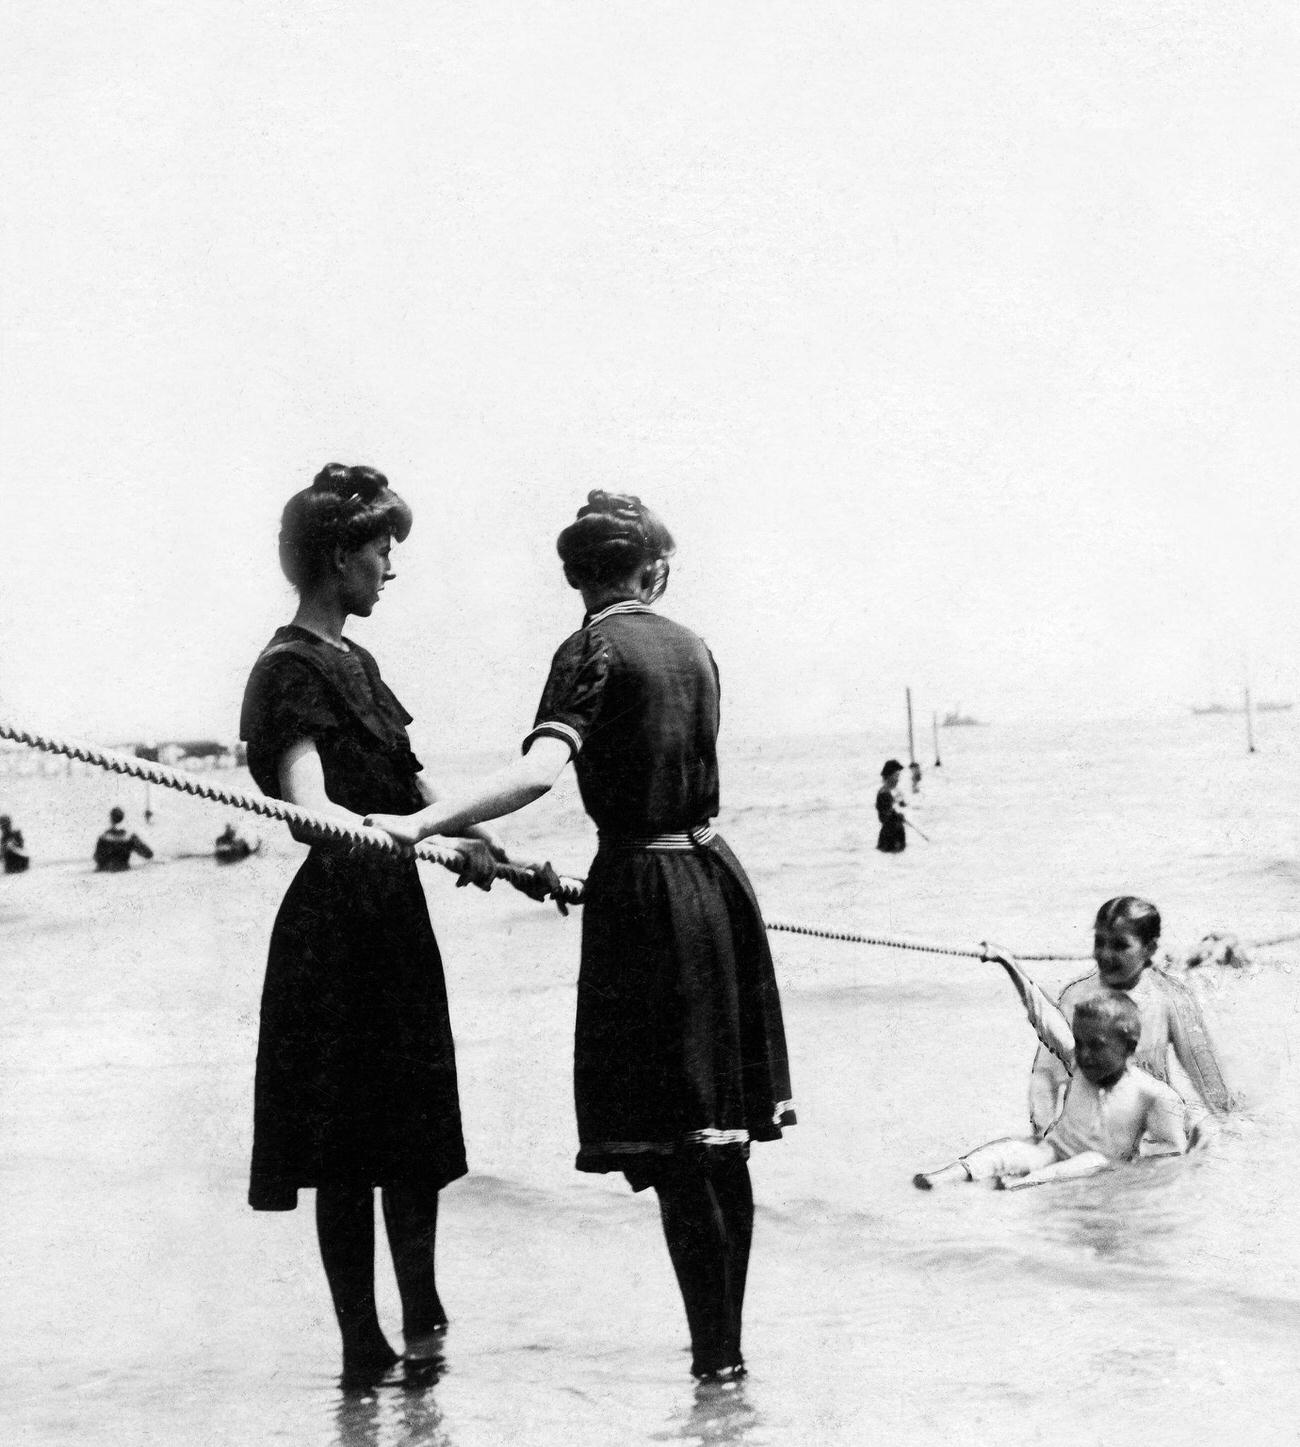 Bathers At The Beach, 1904